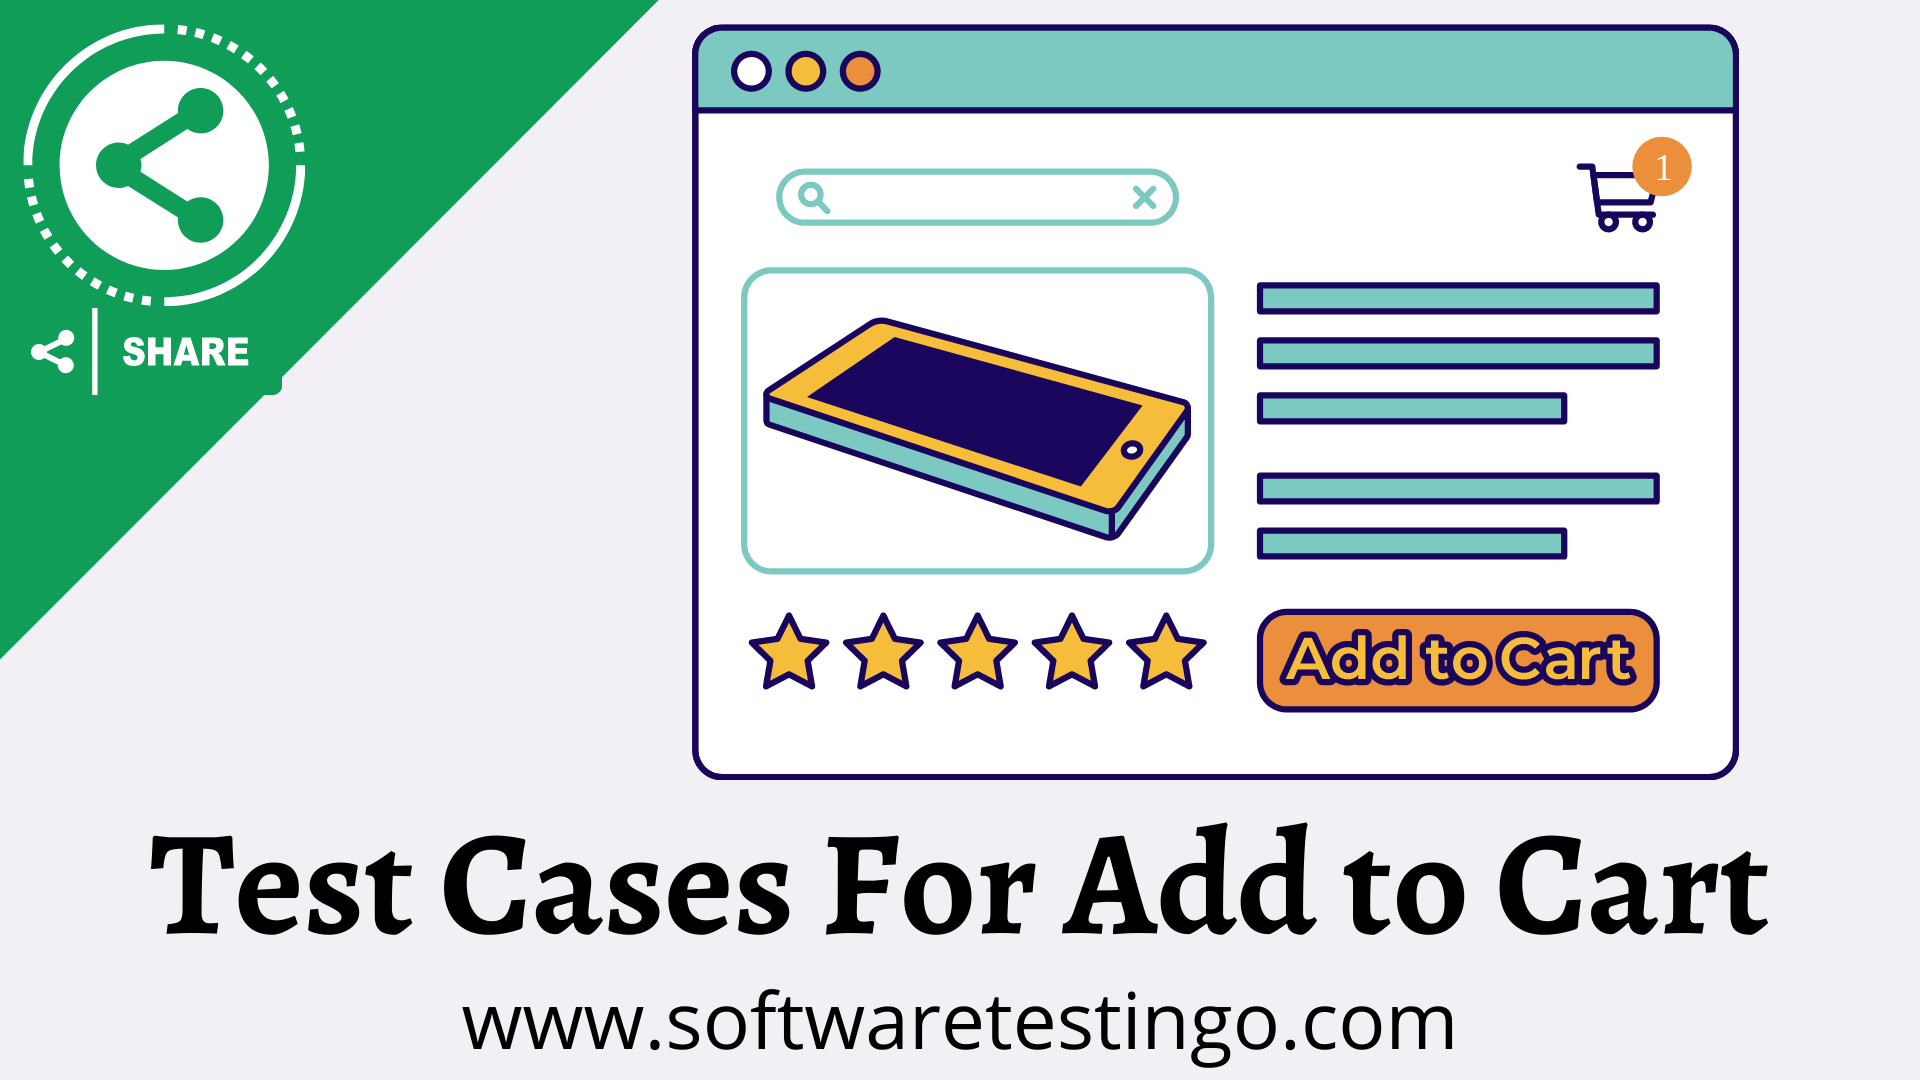 Test Cases for Add to Cart Button